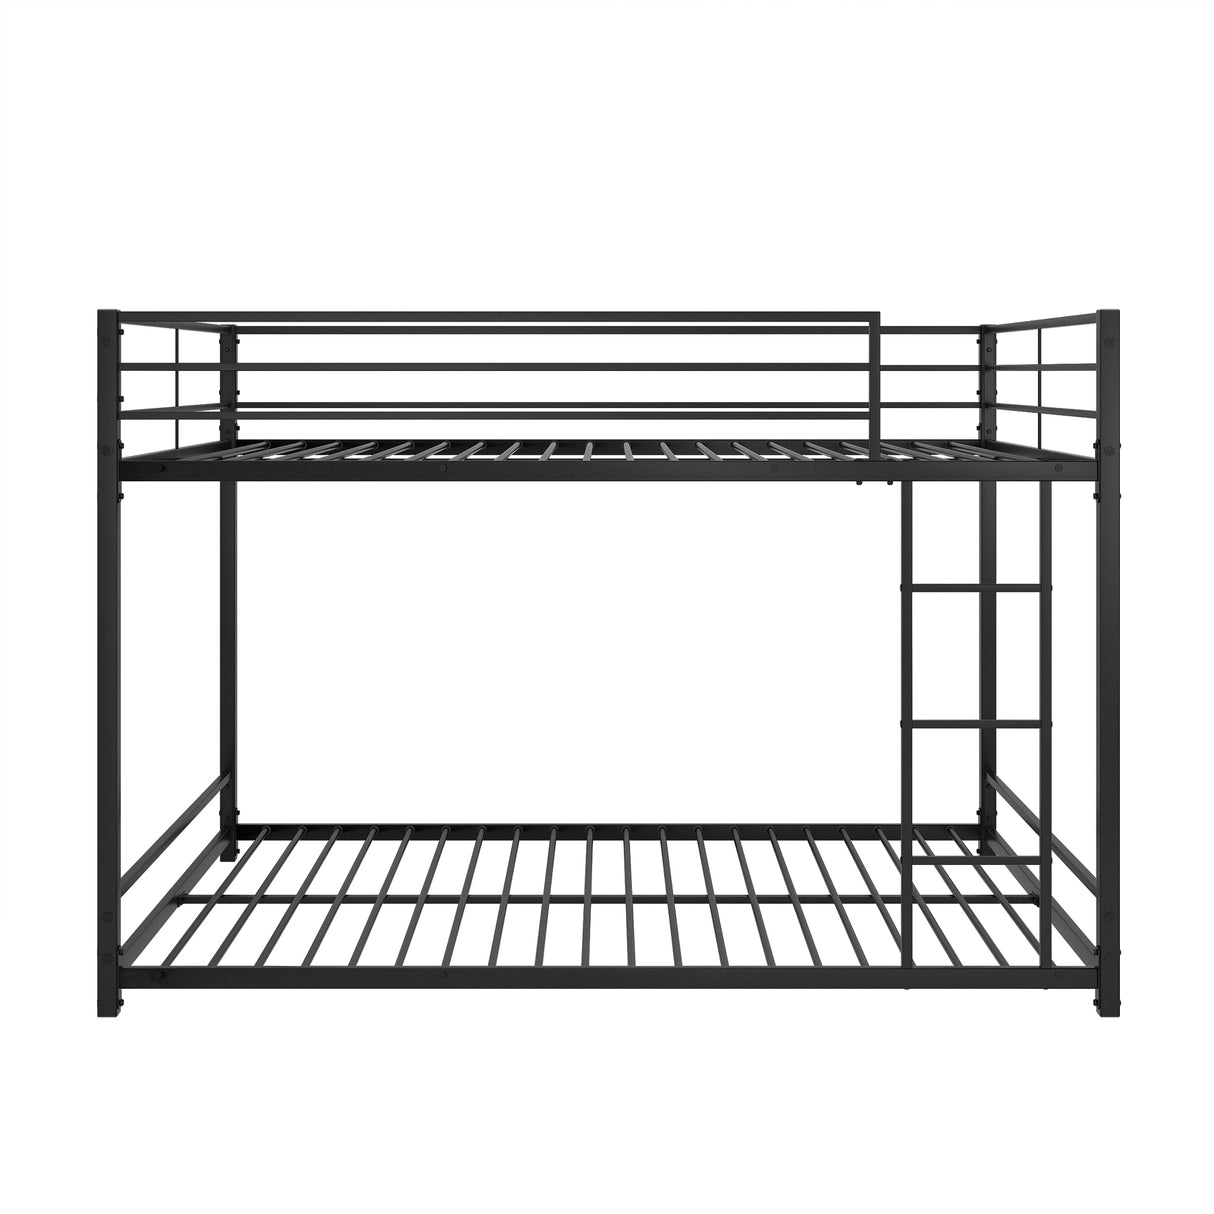 Metal Bunk Bed Full Over Full, Bunk Bed Frame with Safety Guard Rails, Heavy Duty Space-Saving Design, Easy Assembly Black - Home Elegance USA